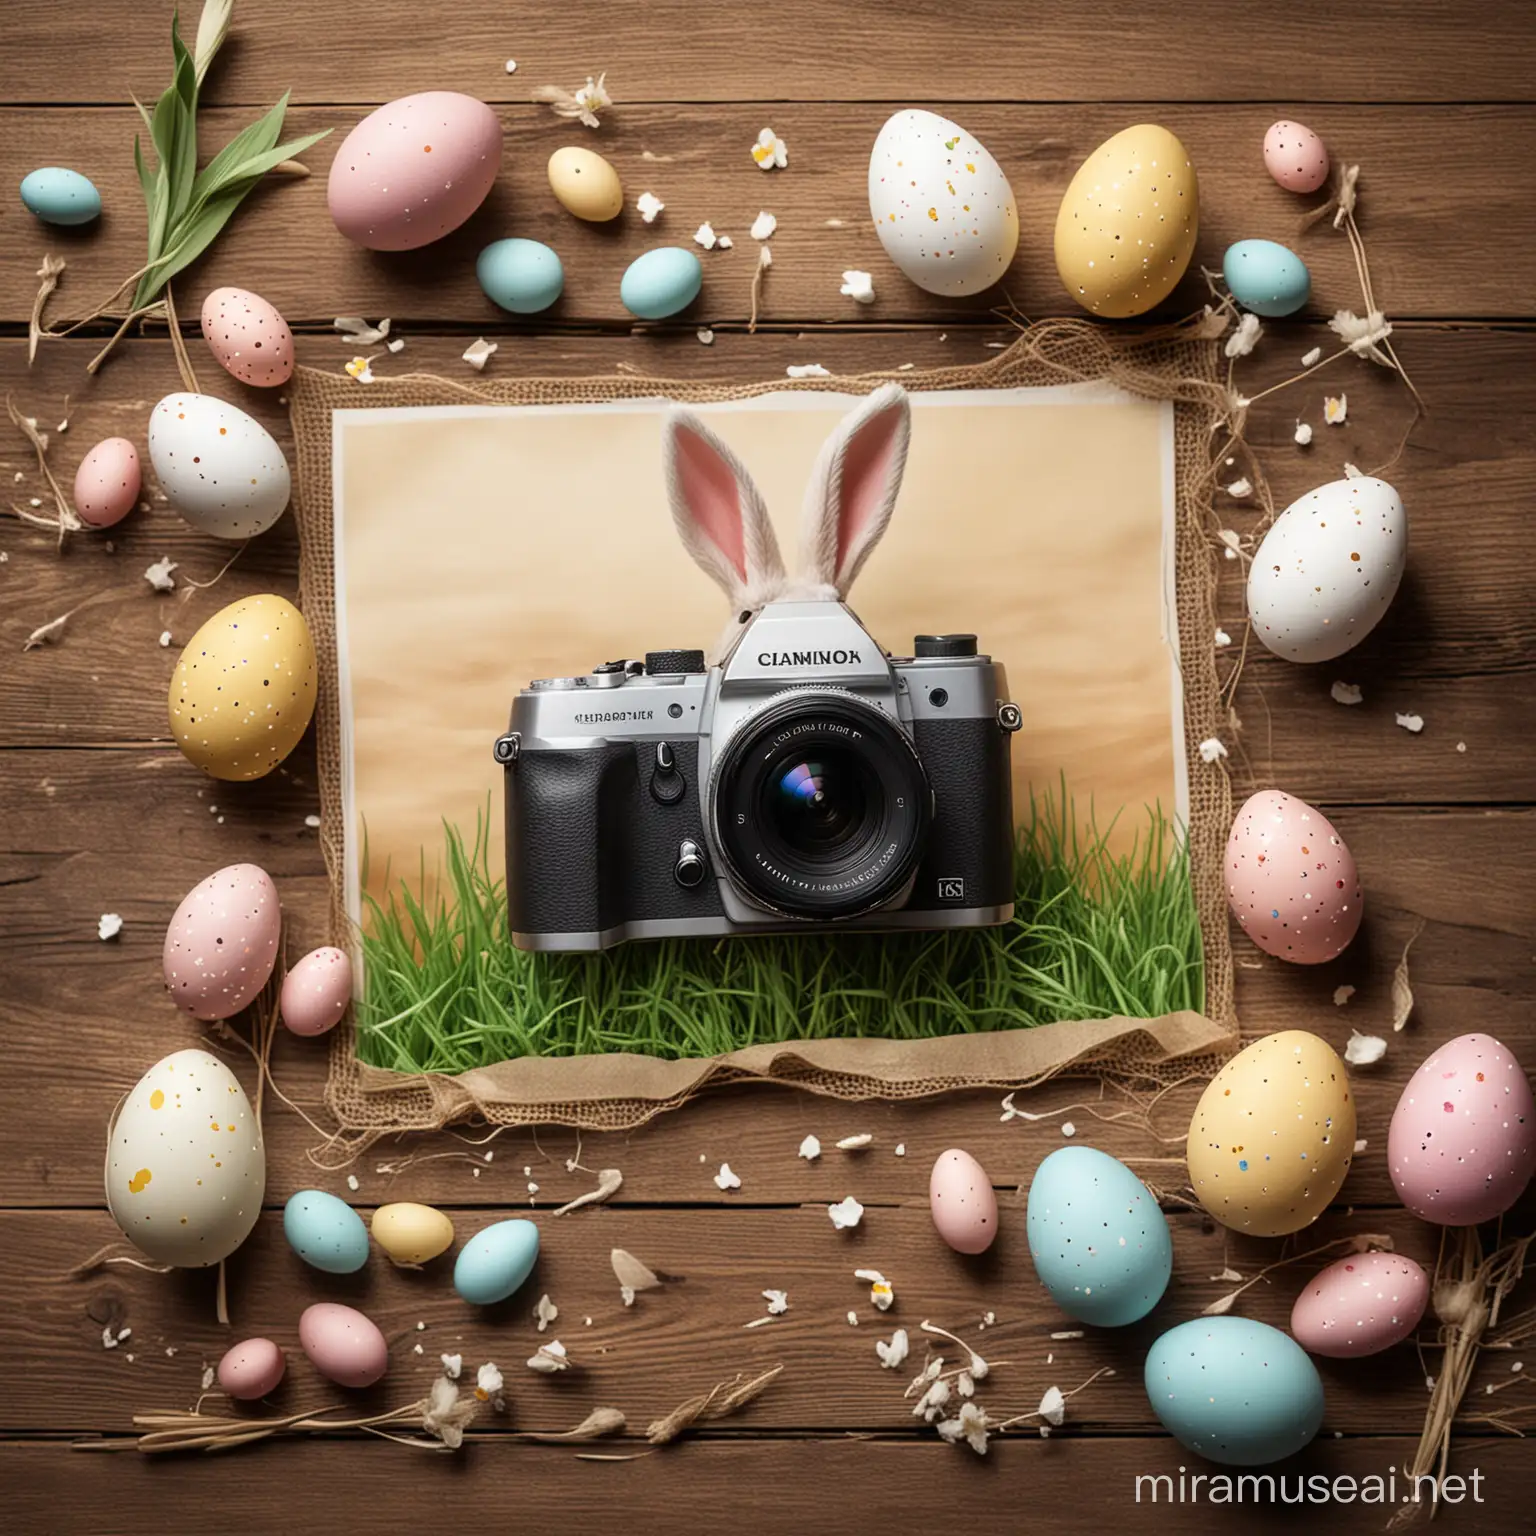 create an happy easter image with a photo camera nearby